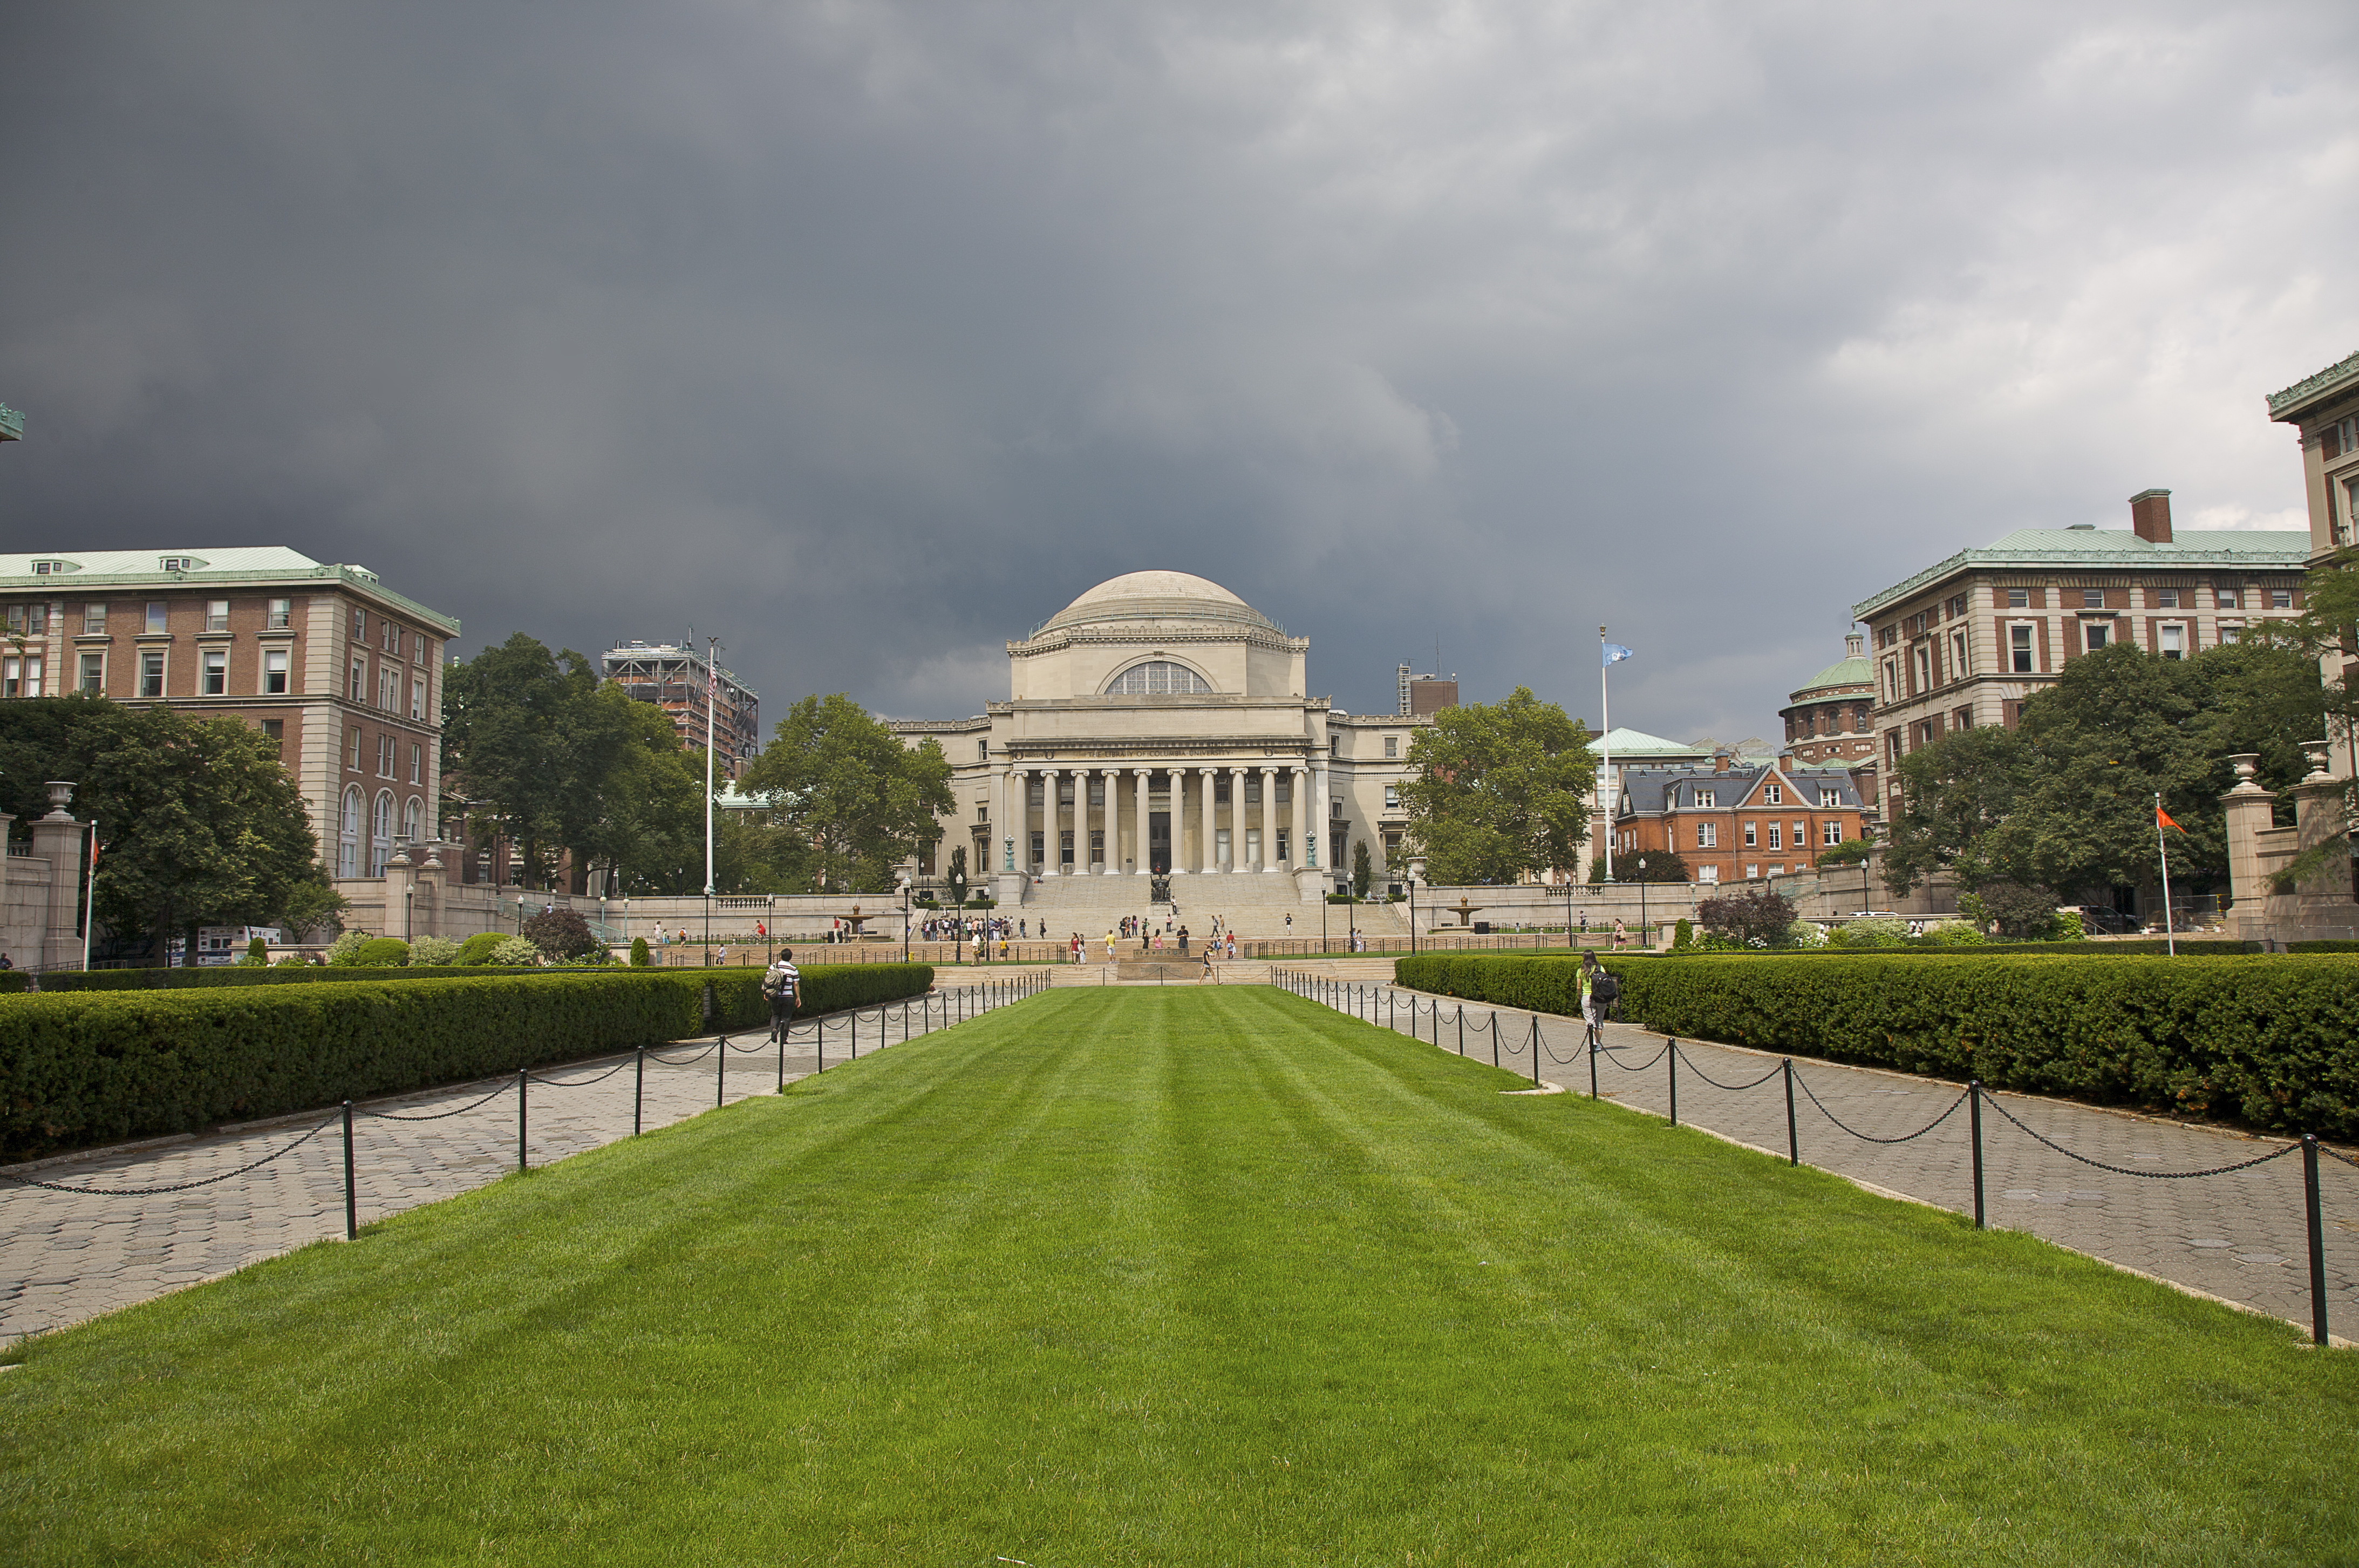 Columbia University, main quad with Low Memorial Library, Upper West Side, New York, NY, U.S.A.